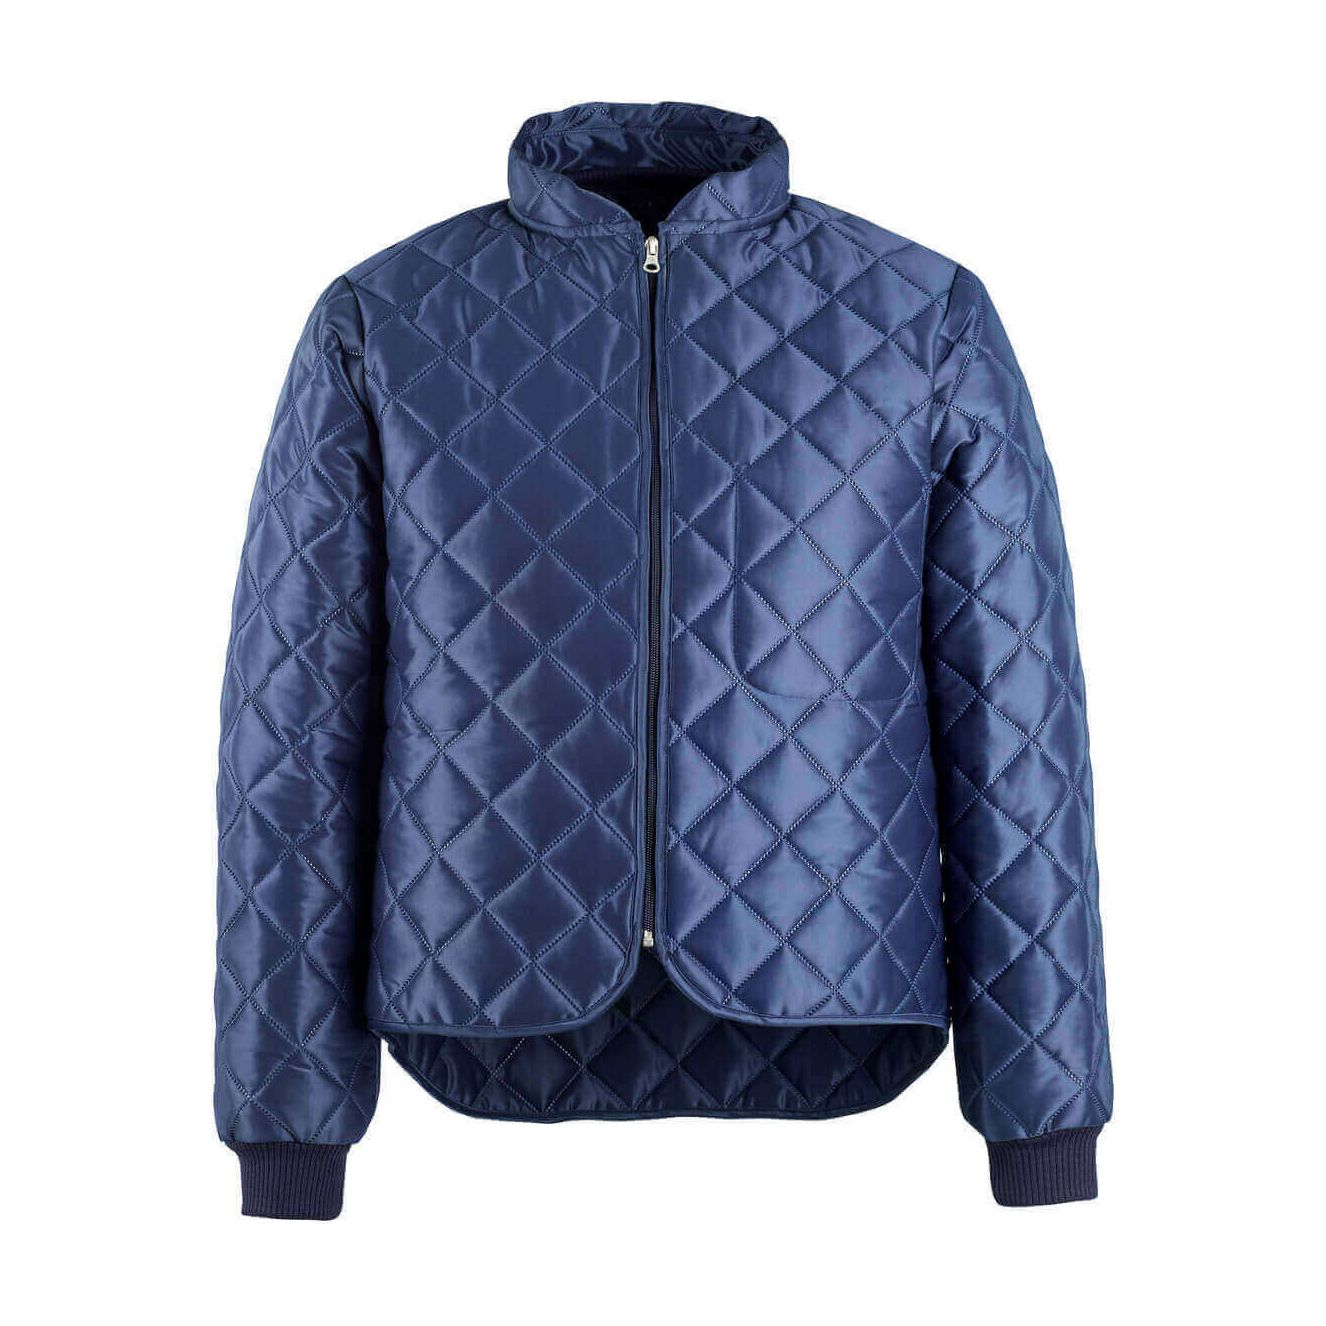 Mascot Ottawa Thermal Work Jacket 13501-707 Front #colour_navy-blue